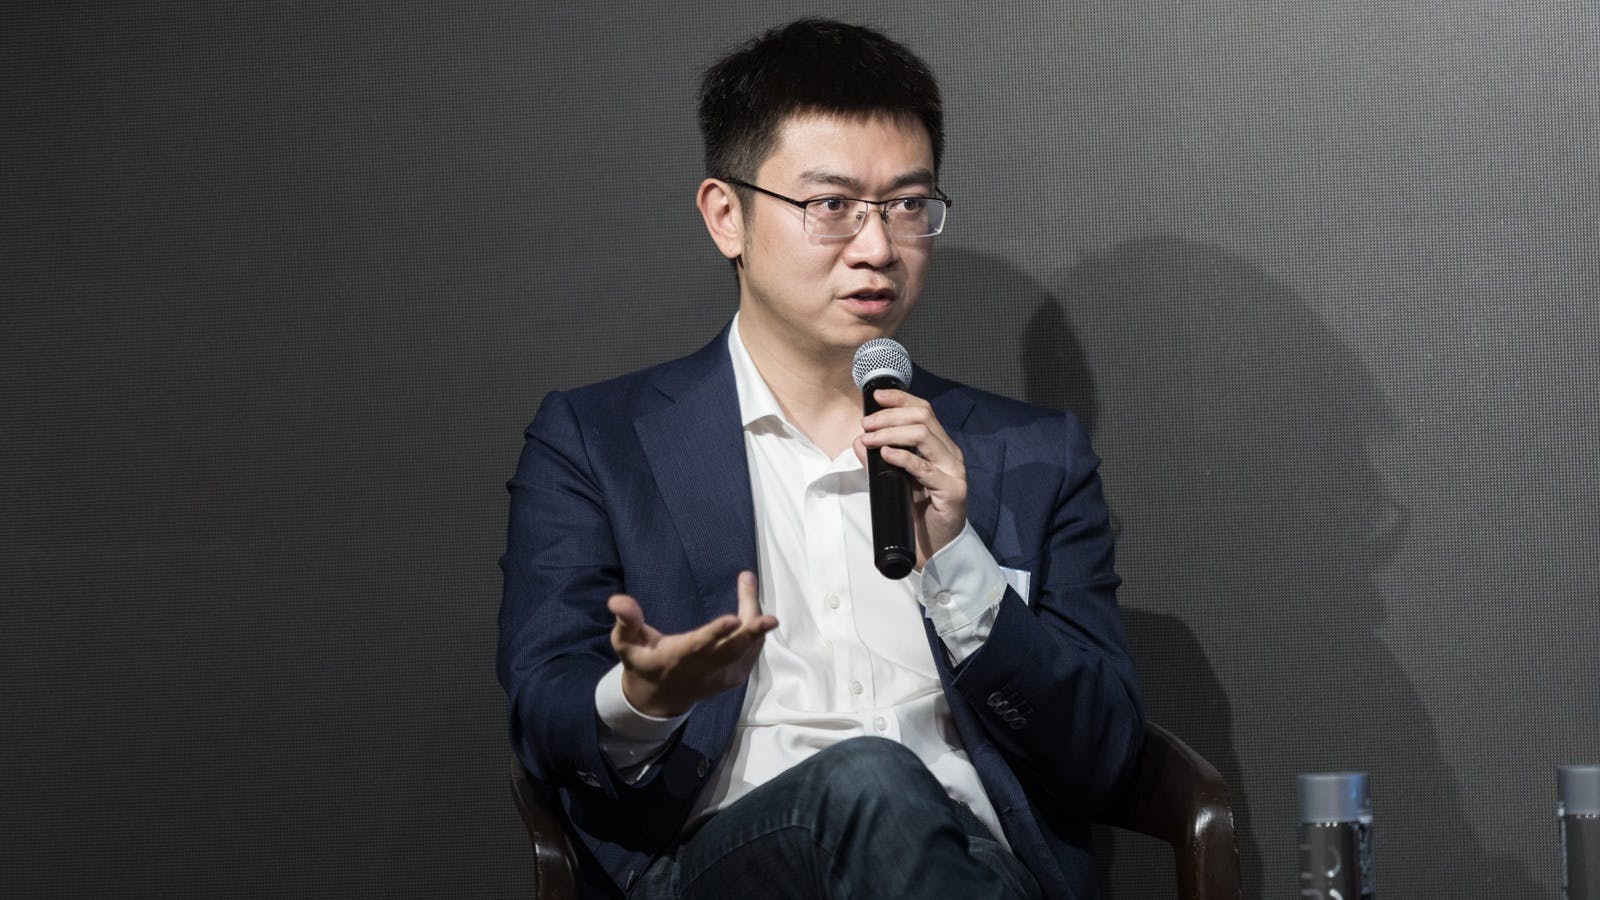  Meng Xing, chief operating officer of Didi’s autonomous driving unit. Photo by SunYiye@UKON